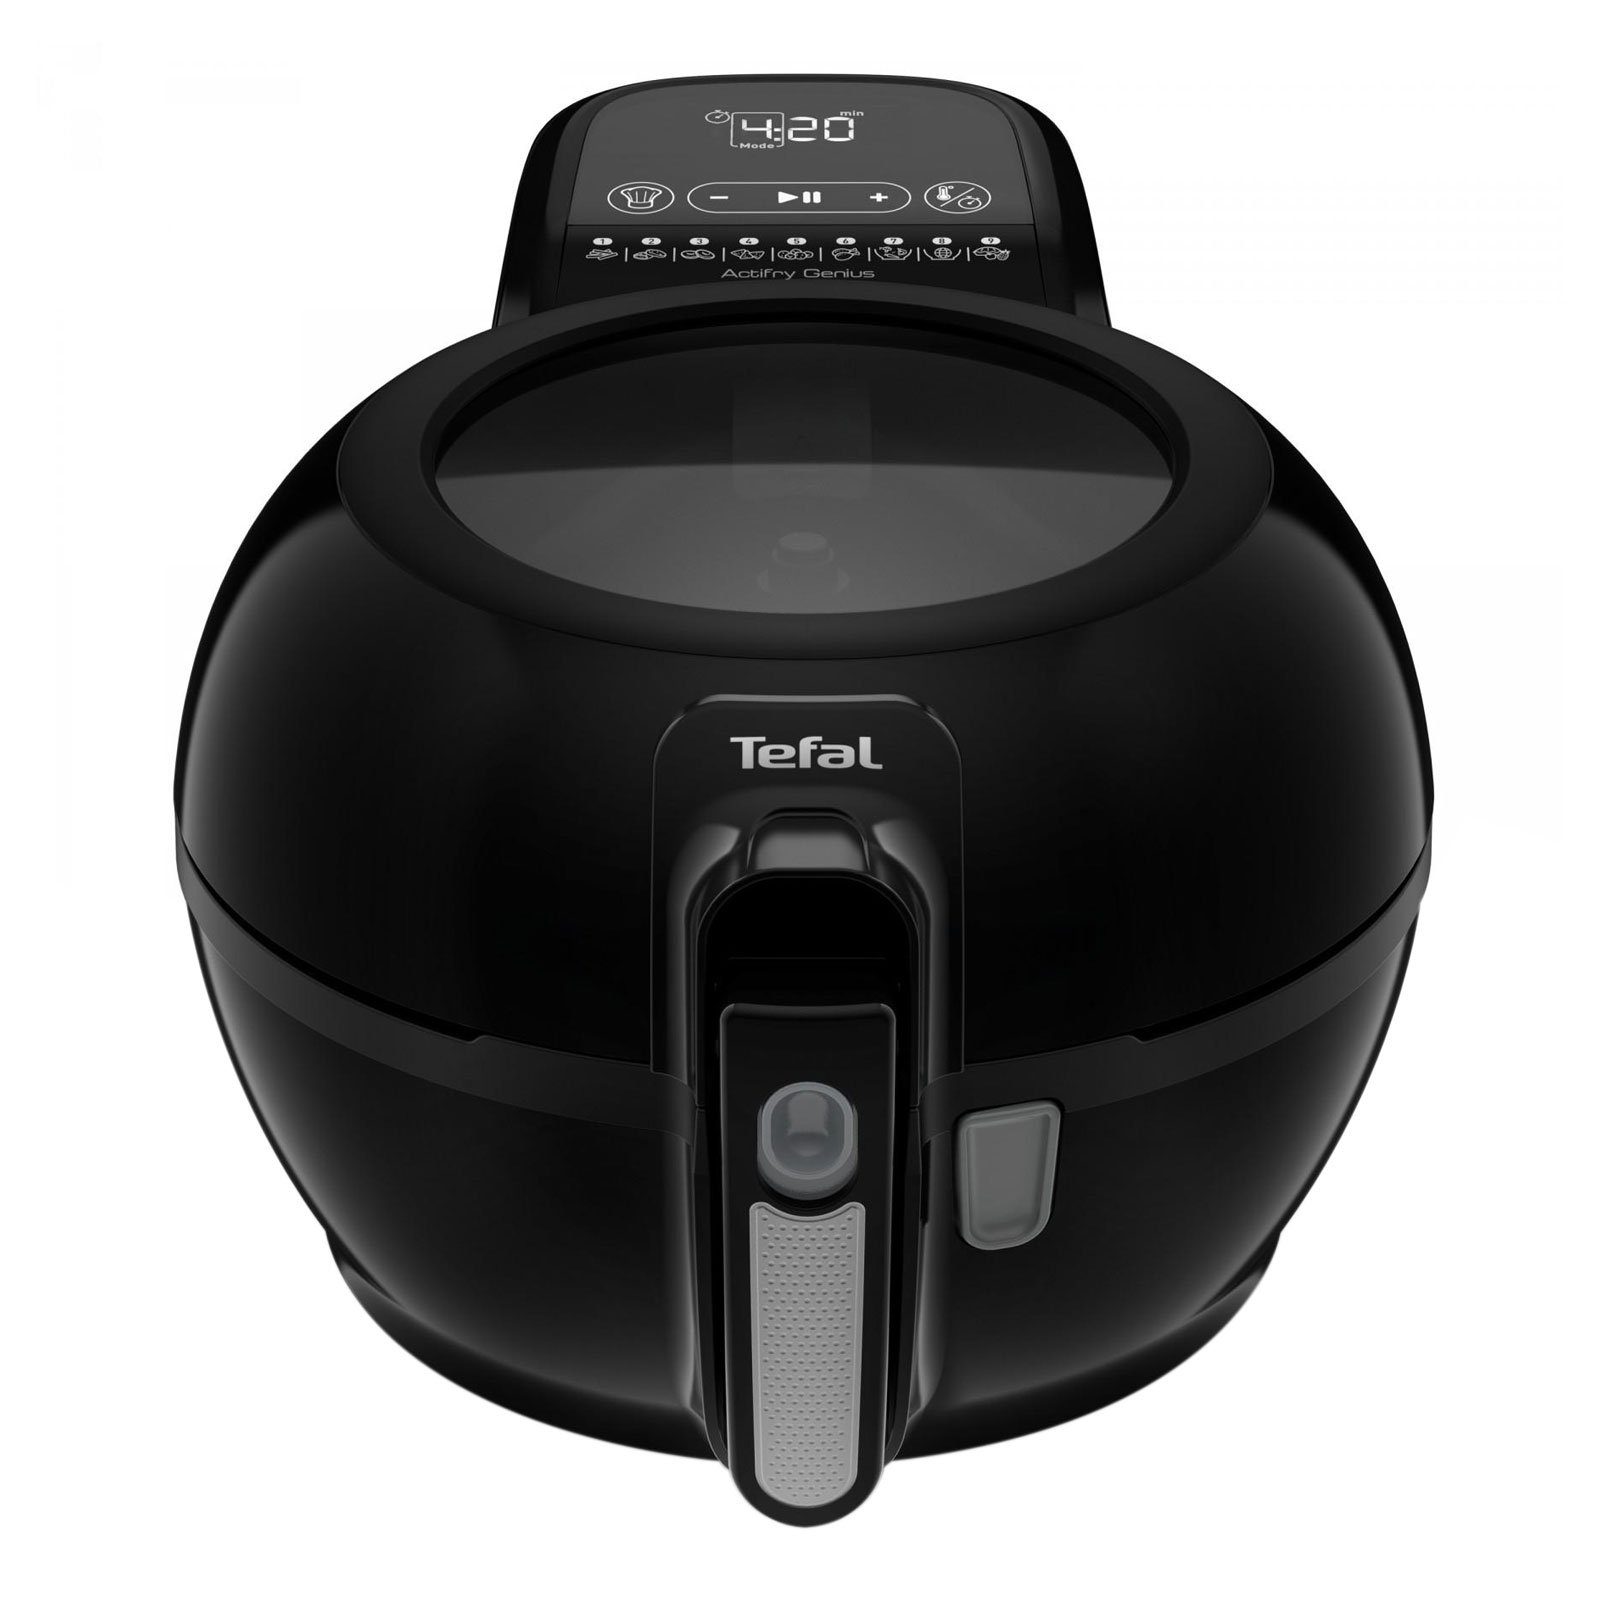 Tefal Fritteuse FZ 773815 ActiFry Genius Smart Heißluft-Fritteuse, 1550 W